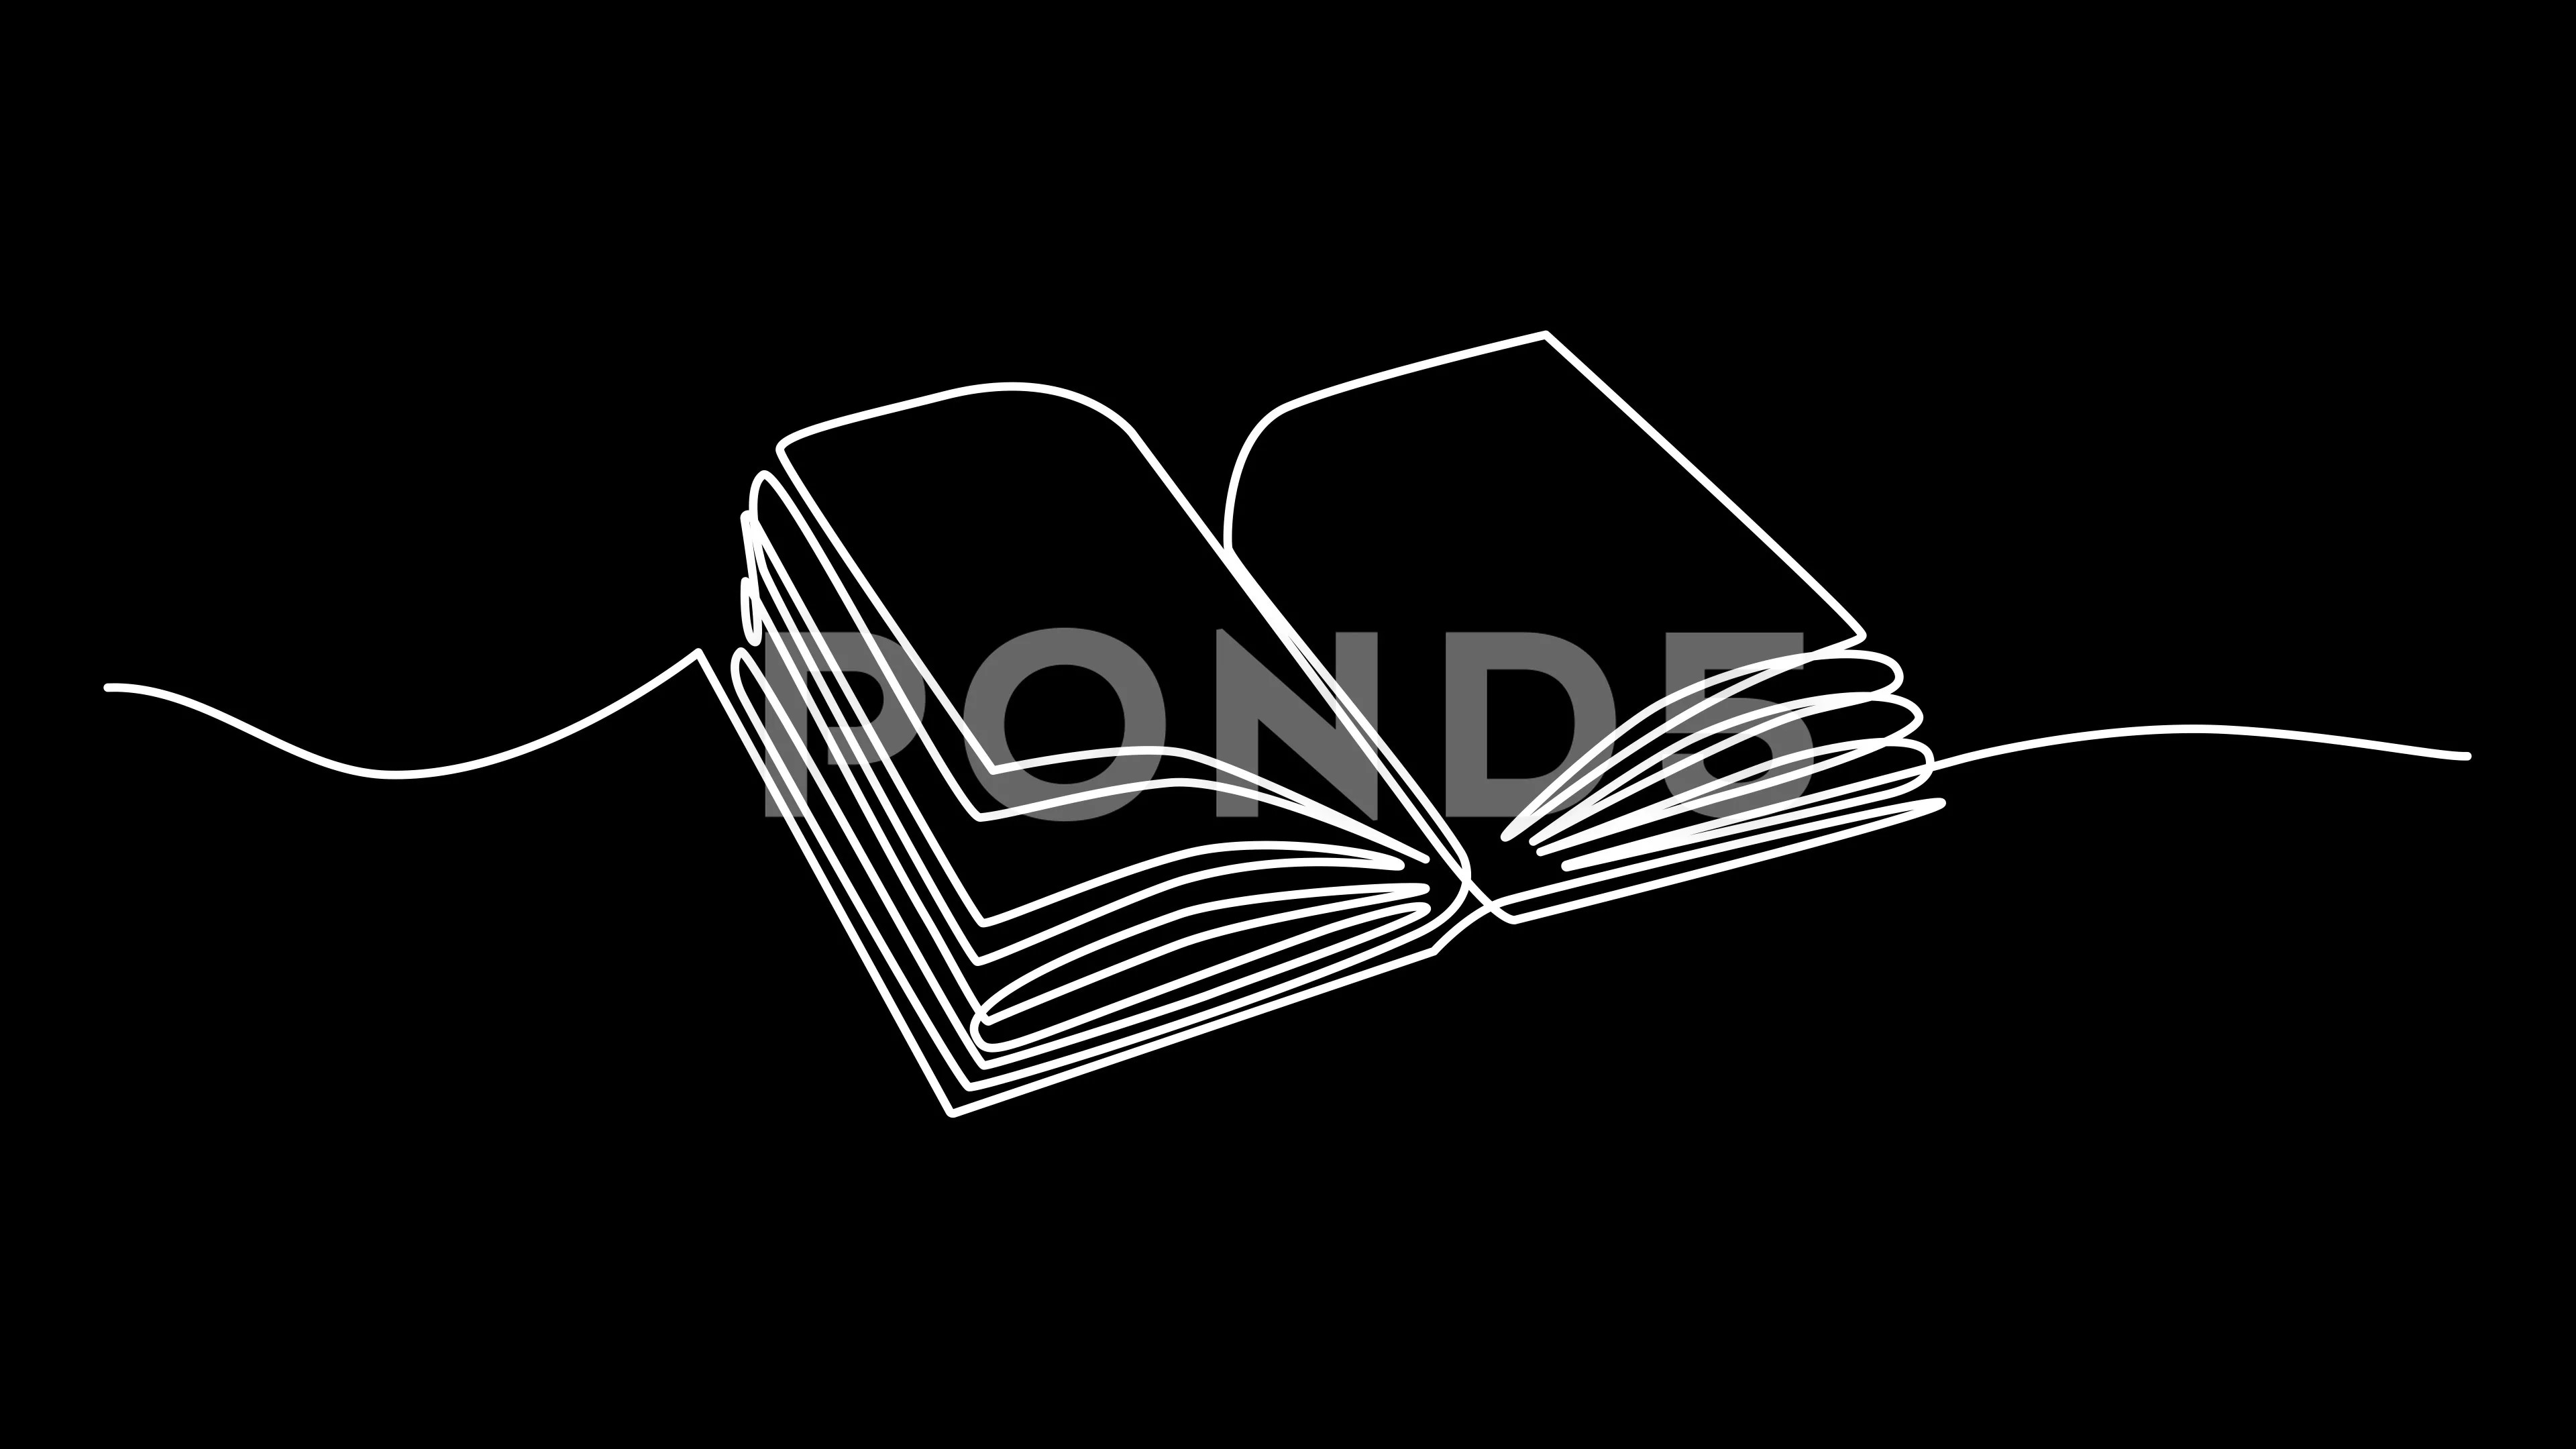 Self drawing animation of open book., Stock Video